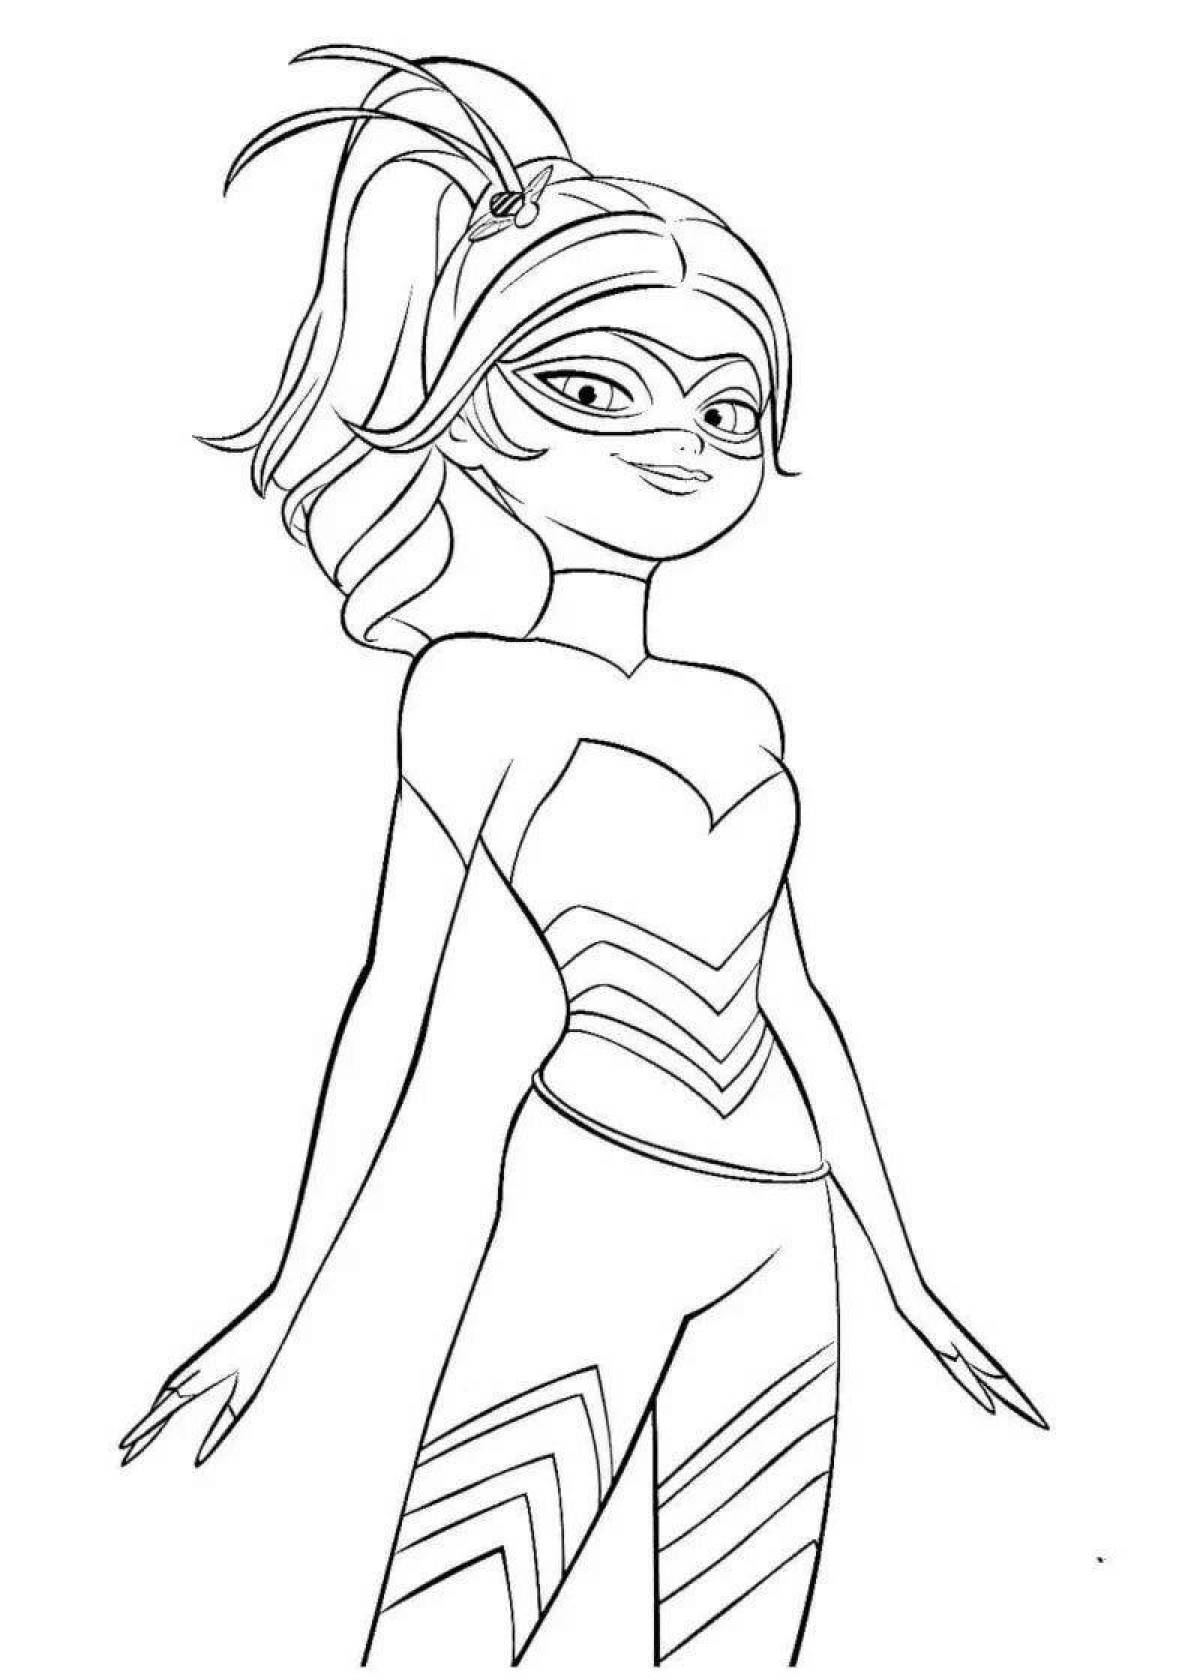 Rina Rouge's lovely coloring page